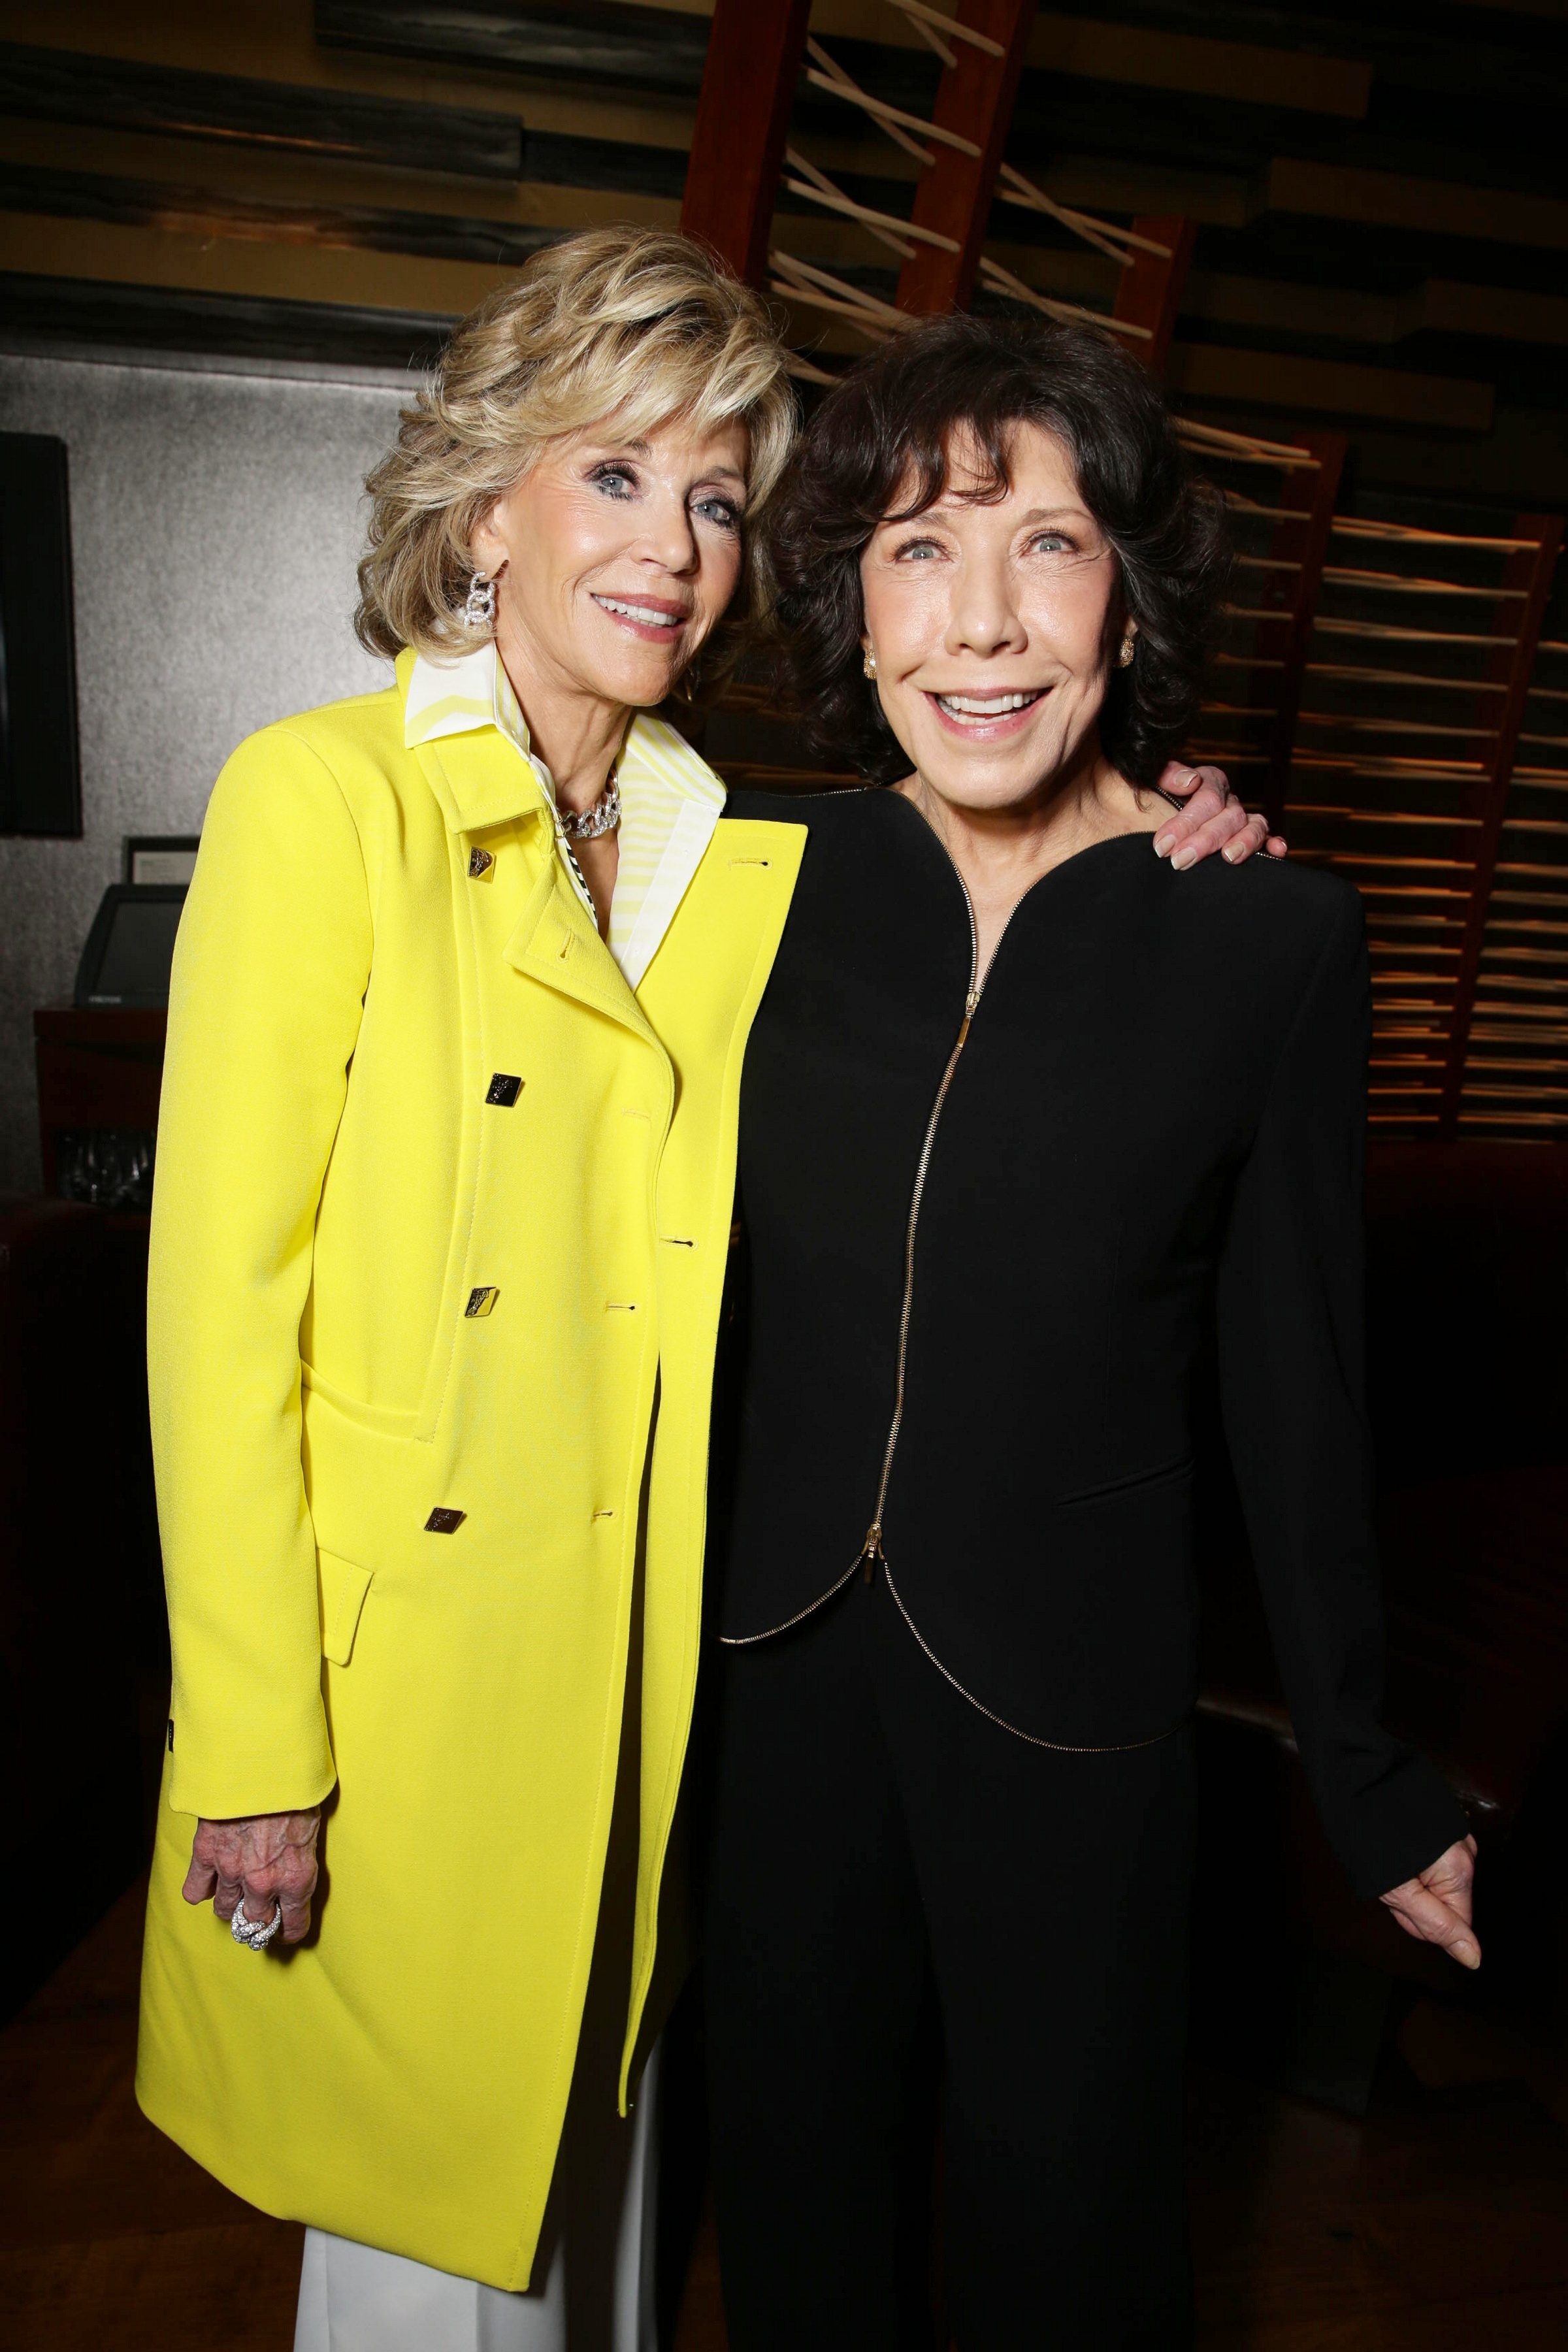 Jane Fonda and Lily Tomlin at the World Premiere of "Grace and Frankie" in Los Angeles on April 29, 2015. (Eric Charbonneau—Invision for Netflix/AP)